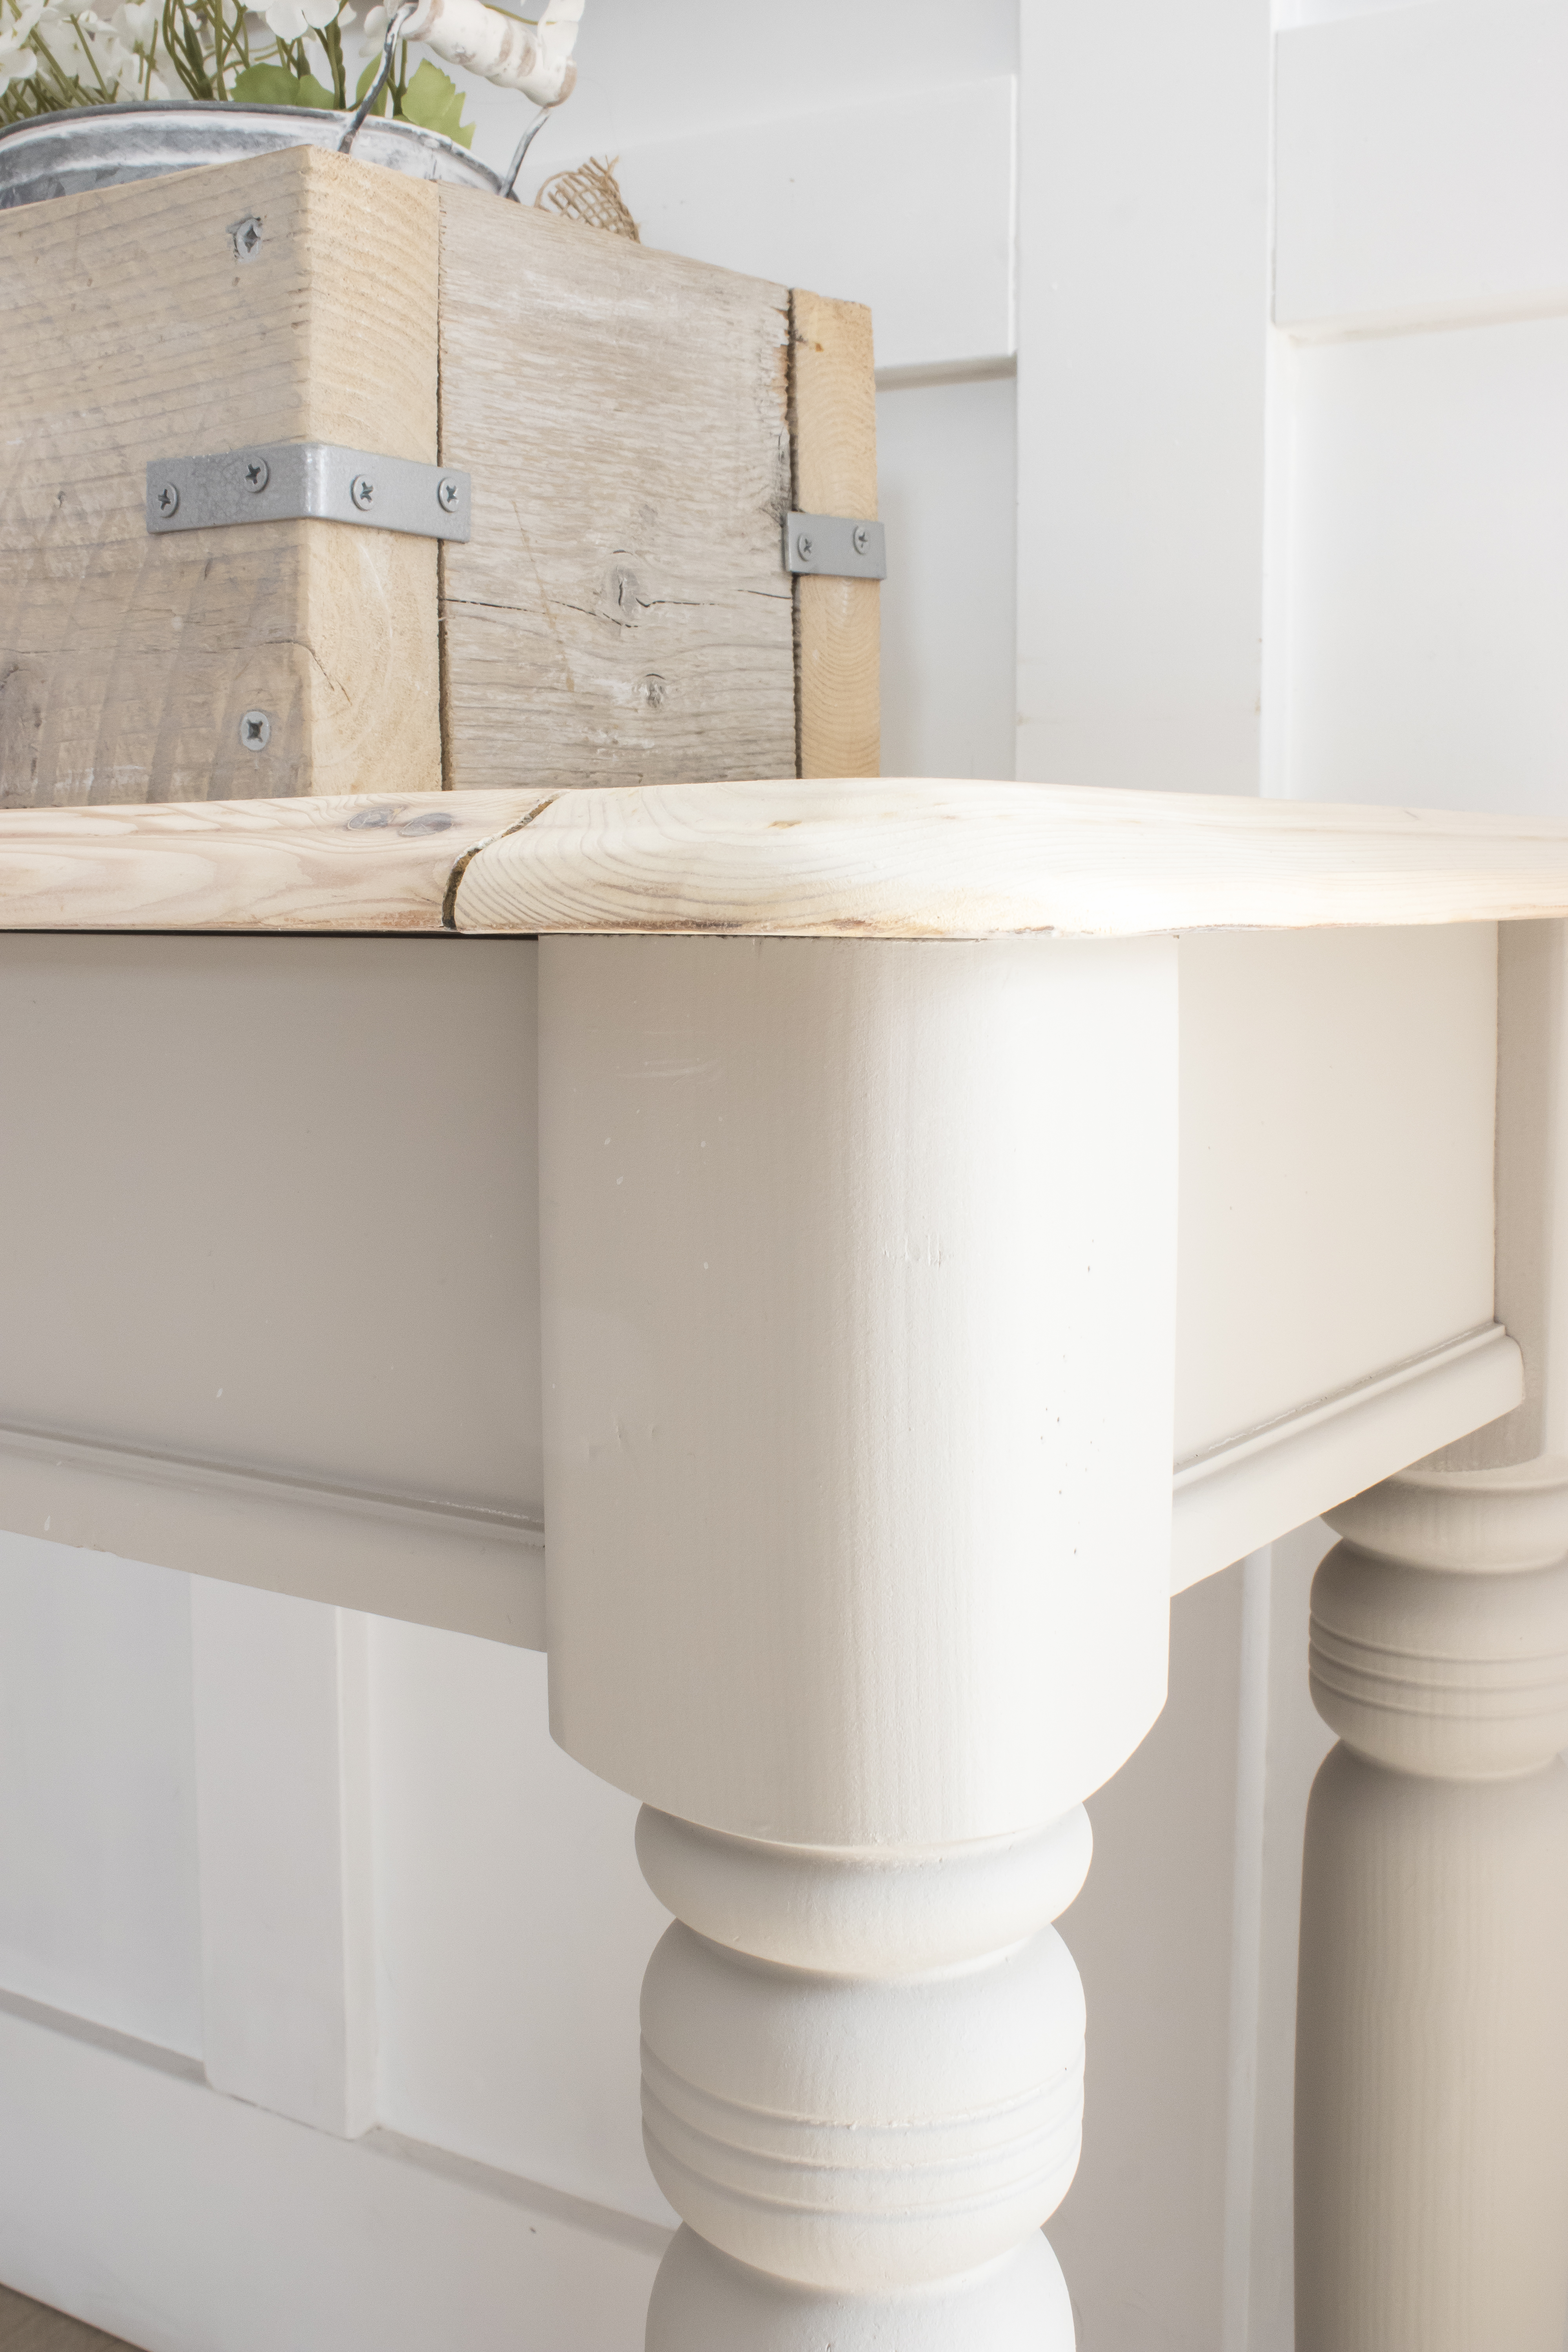 MCM Console Table Painted in Reverie by Country Chic Paint